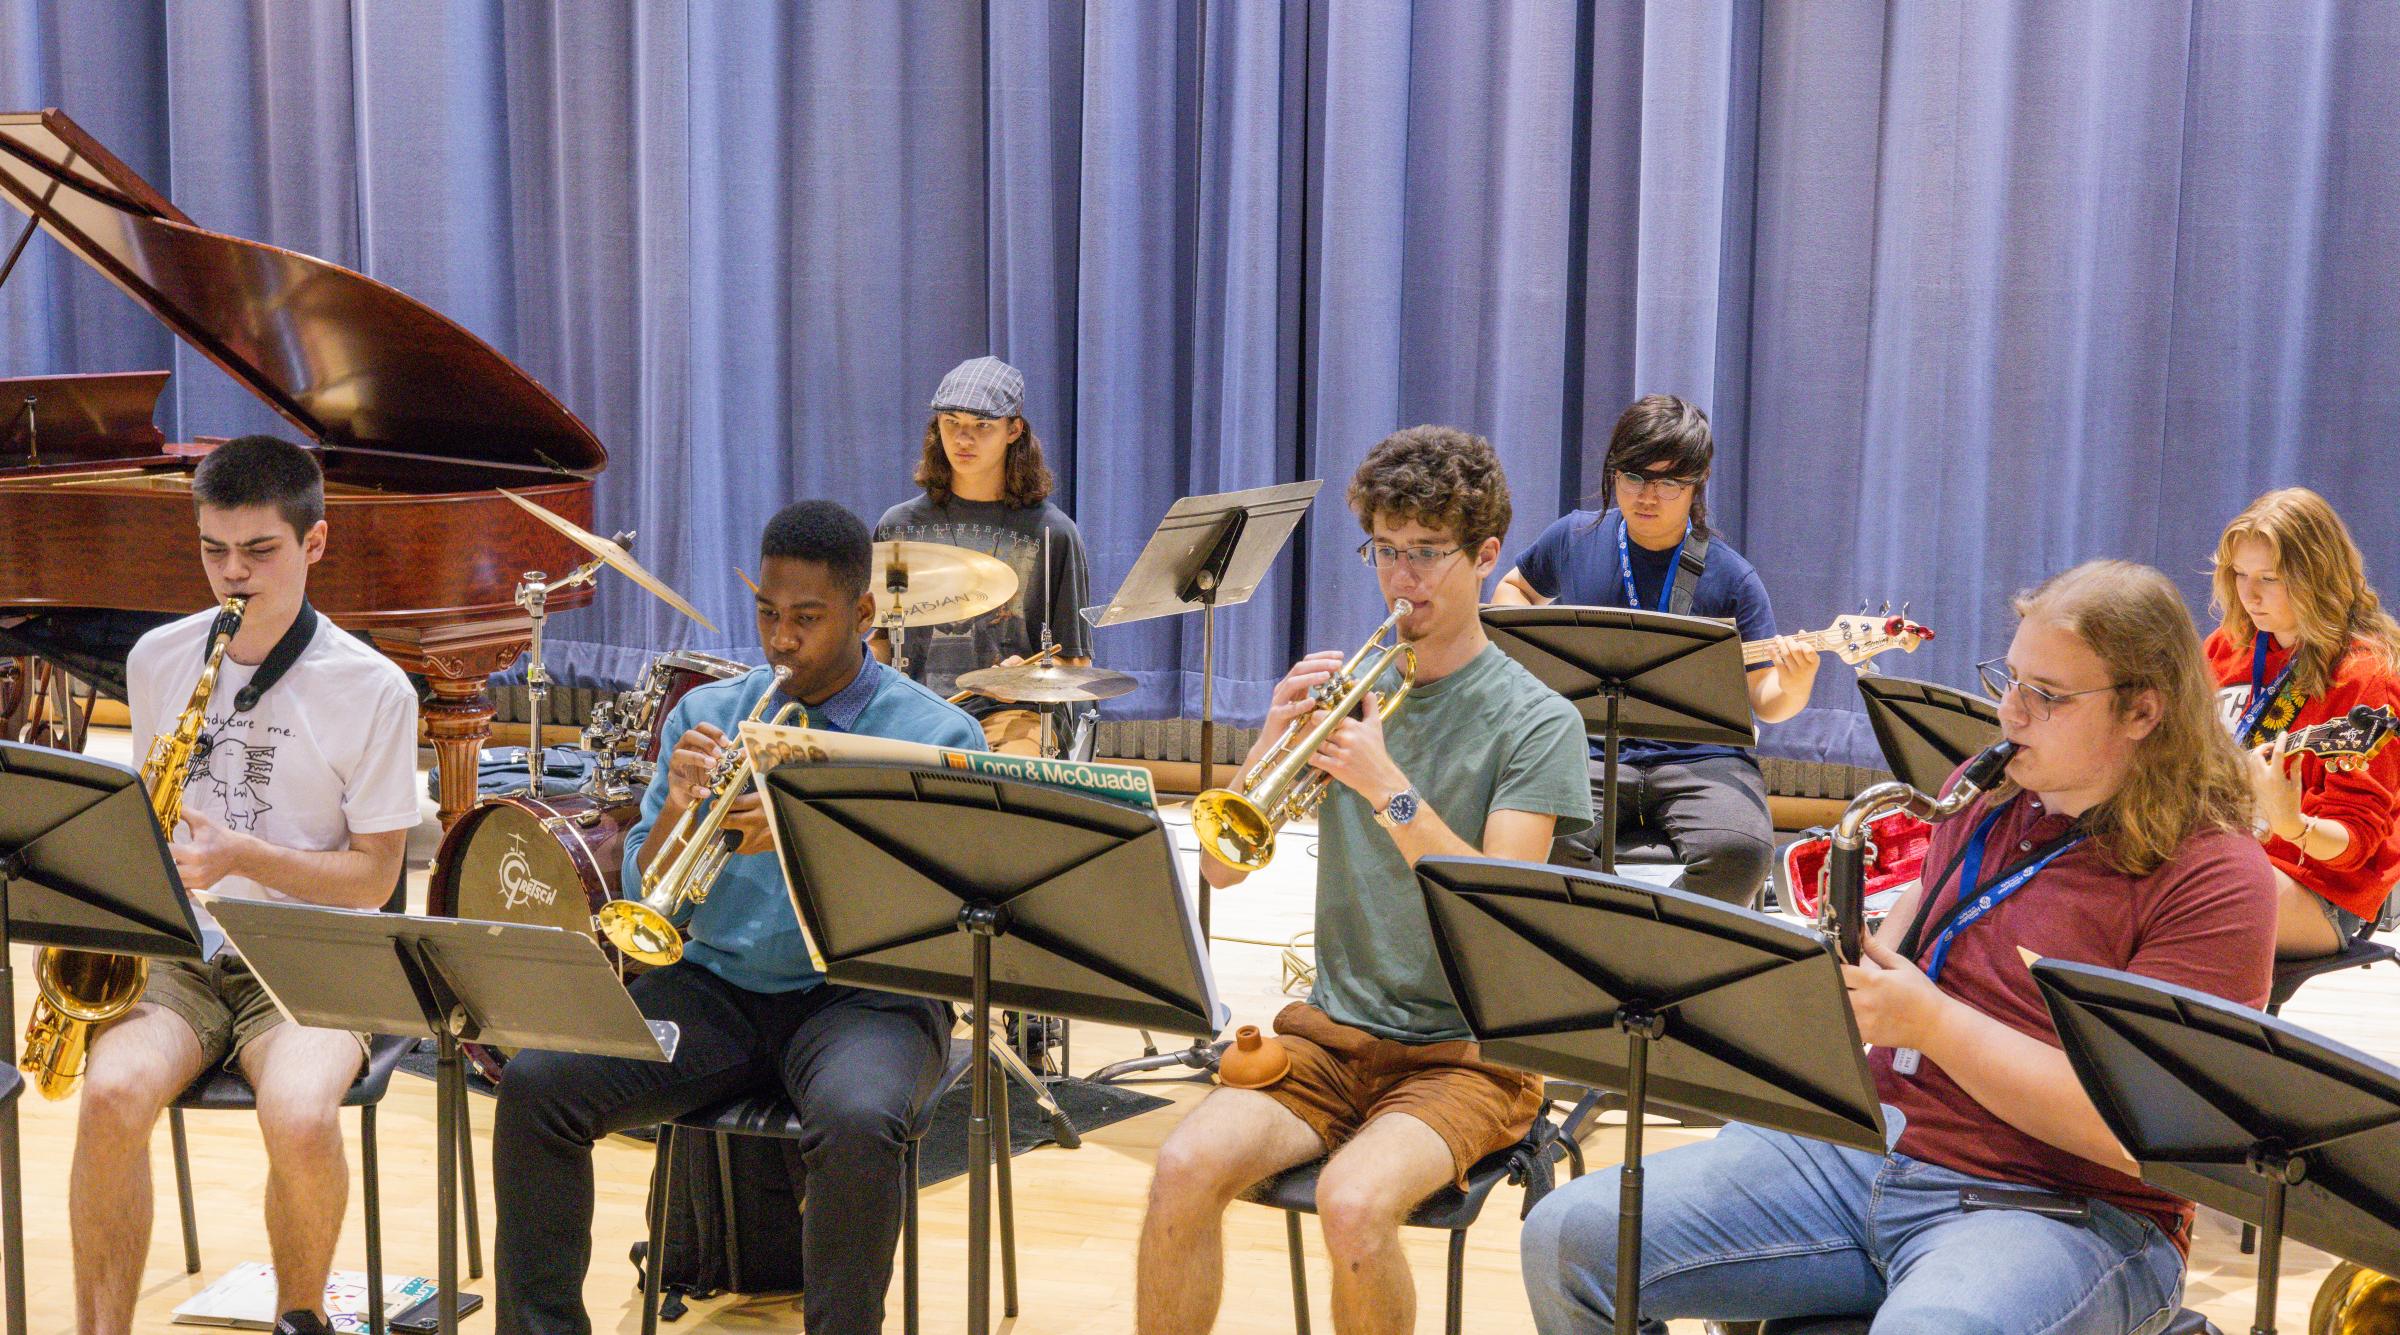 A diverse group of students sit in rows playing various instruments in front of music stands